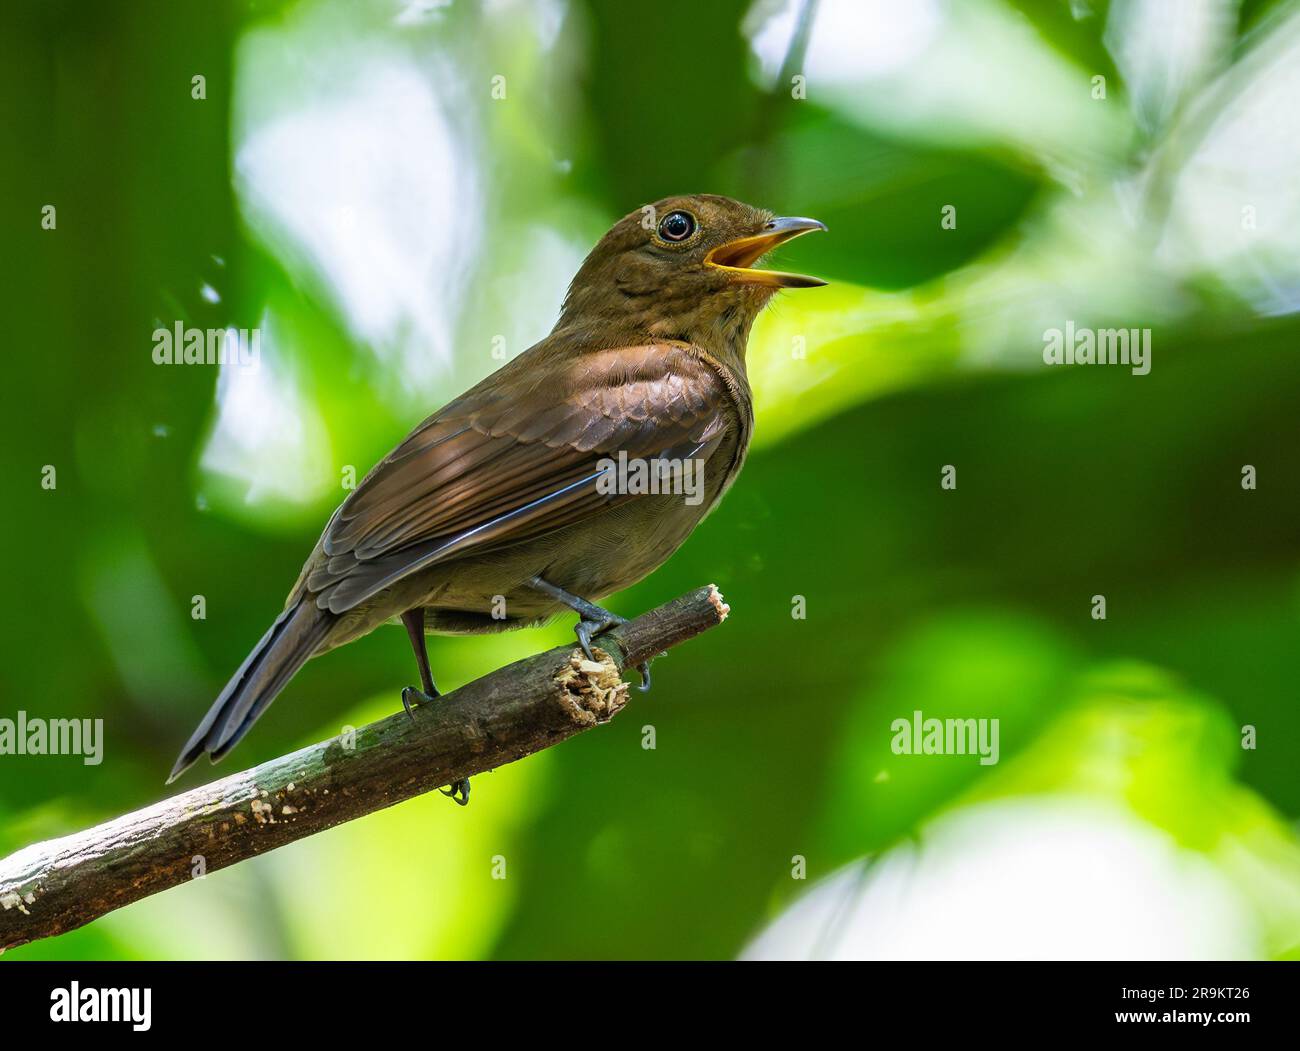 A Russet-winged Schiffornis (Schiffornis stenorhyncha) singing on abranch. Colombia, South America. Stock Photo